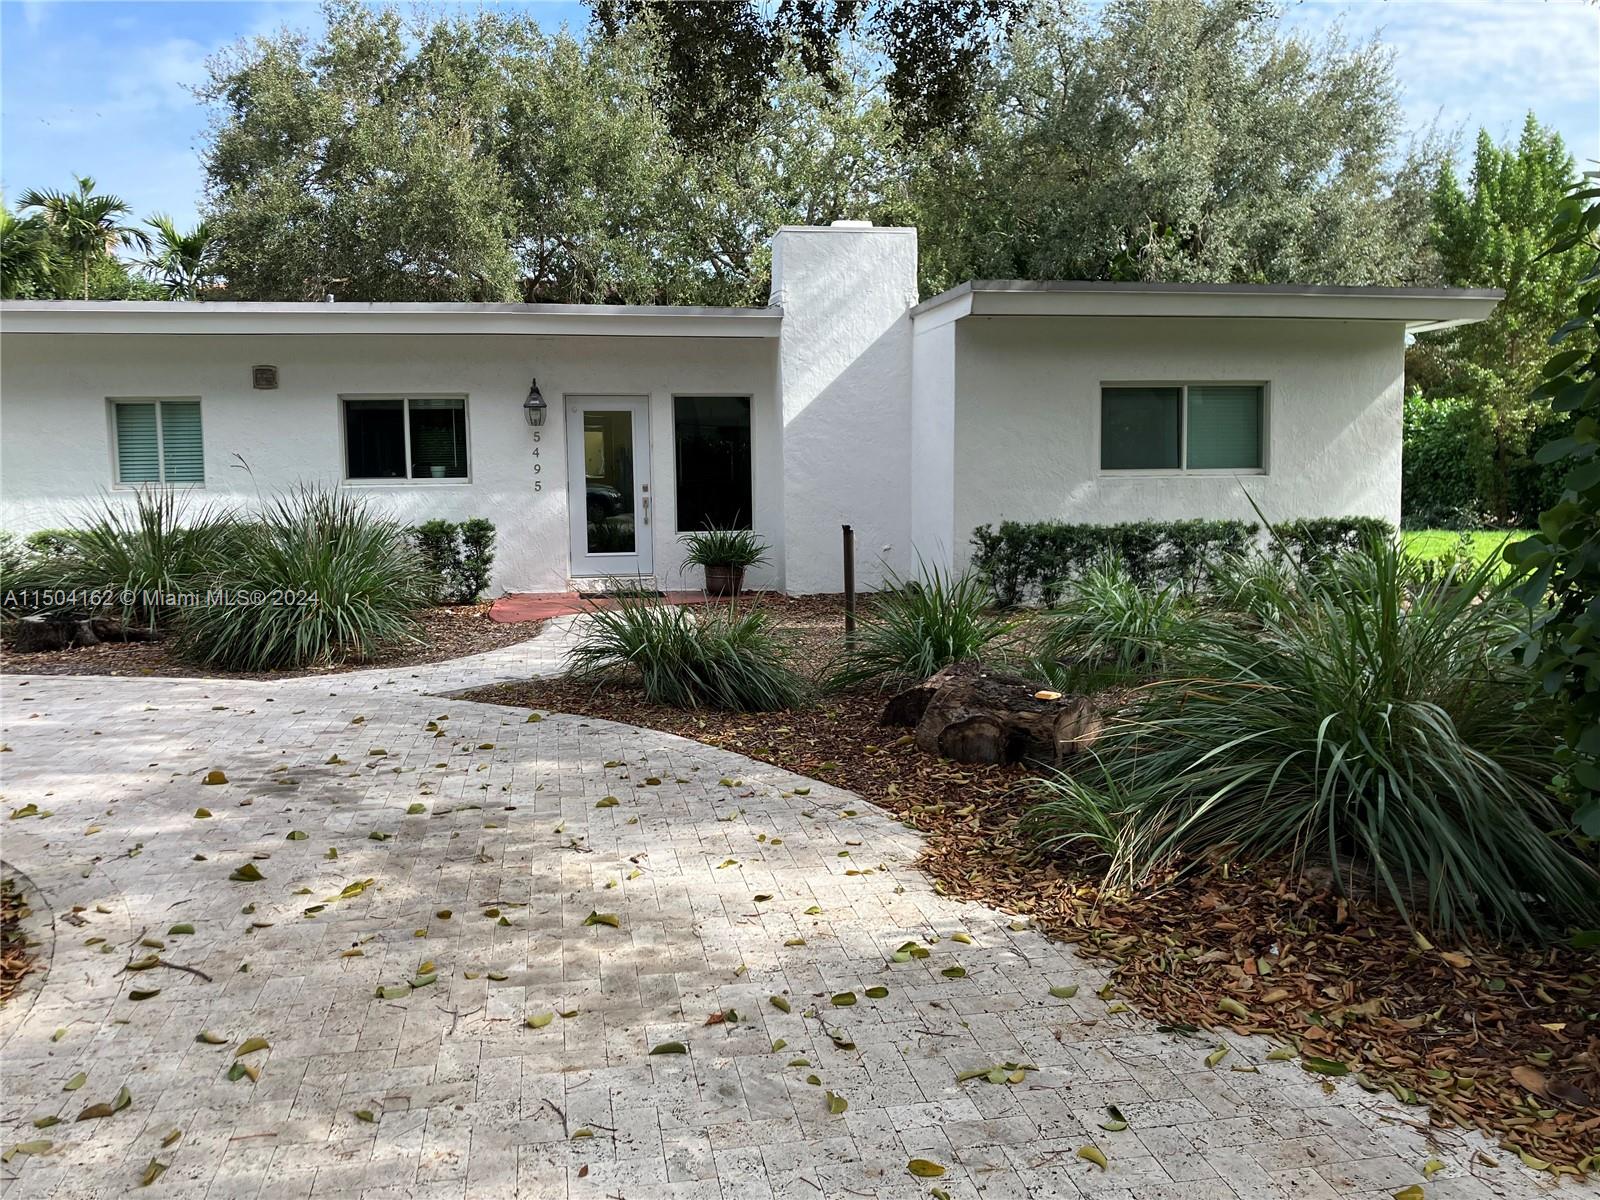 5495 SW 68th Ave, Miami, Florida 33155, 3 Bedrooms Bedrooms, ,2 BathroomsBathrooms,Residentiallease,For Rent,5495 SW 68th Ave,A11504162